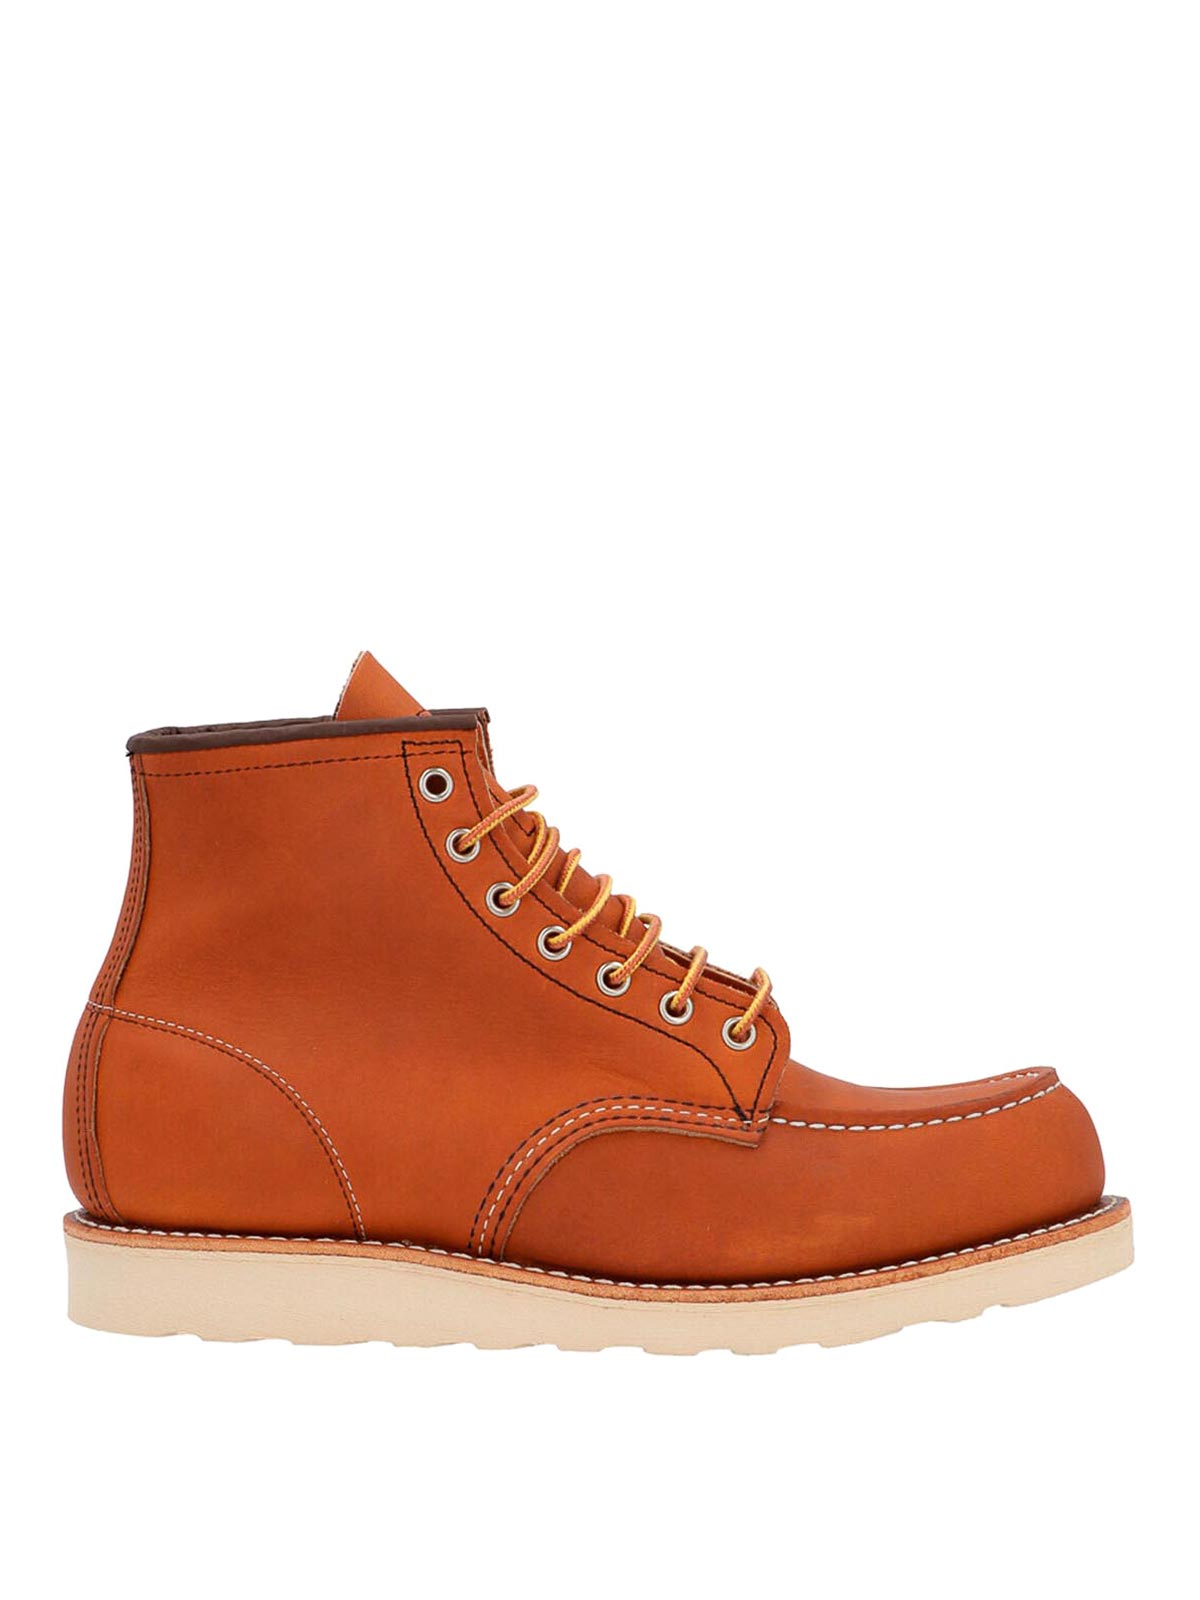 RED WING SHOES BOTINES - MARRÓN